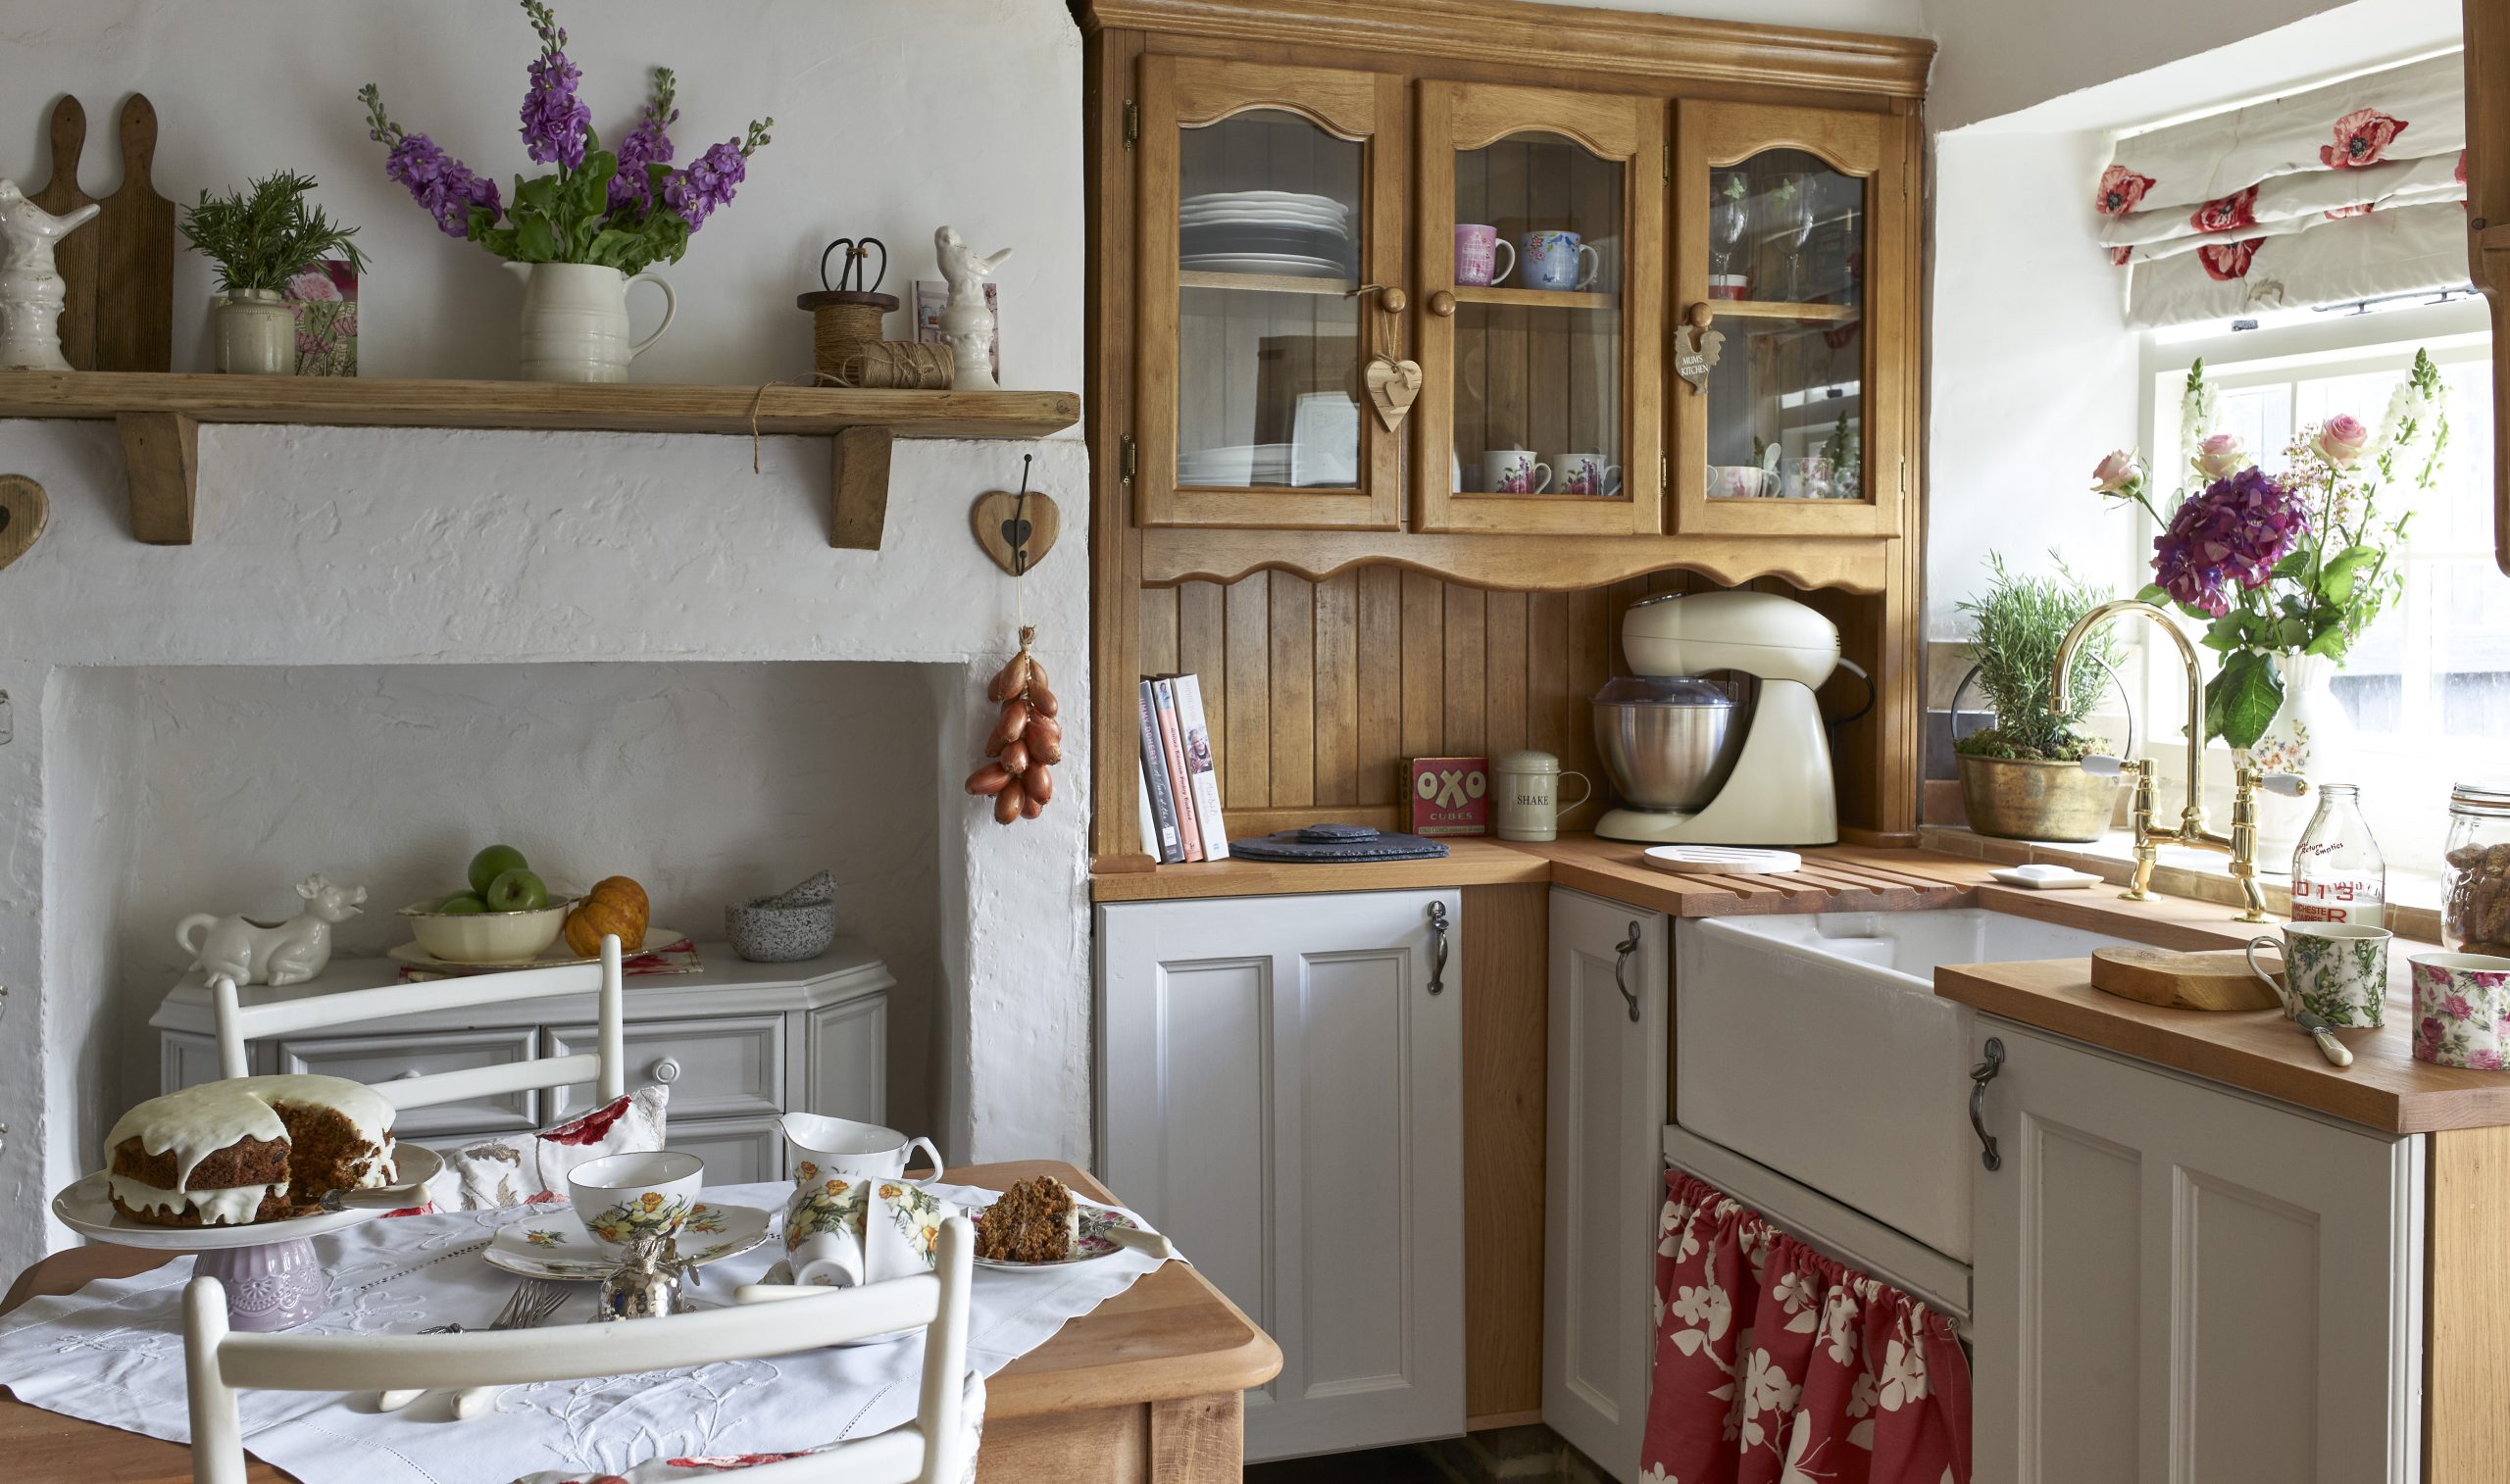 Step into Vintage-Inspired Kitchens